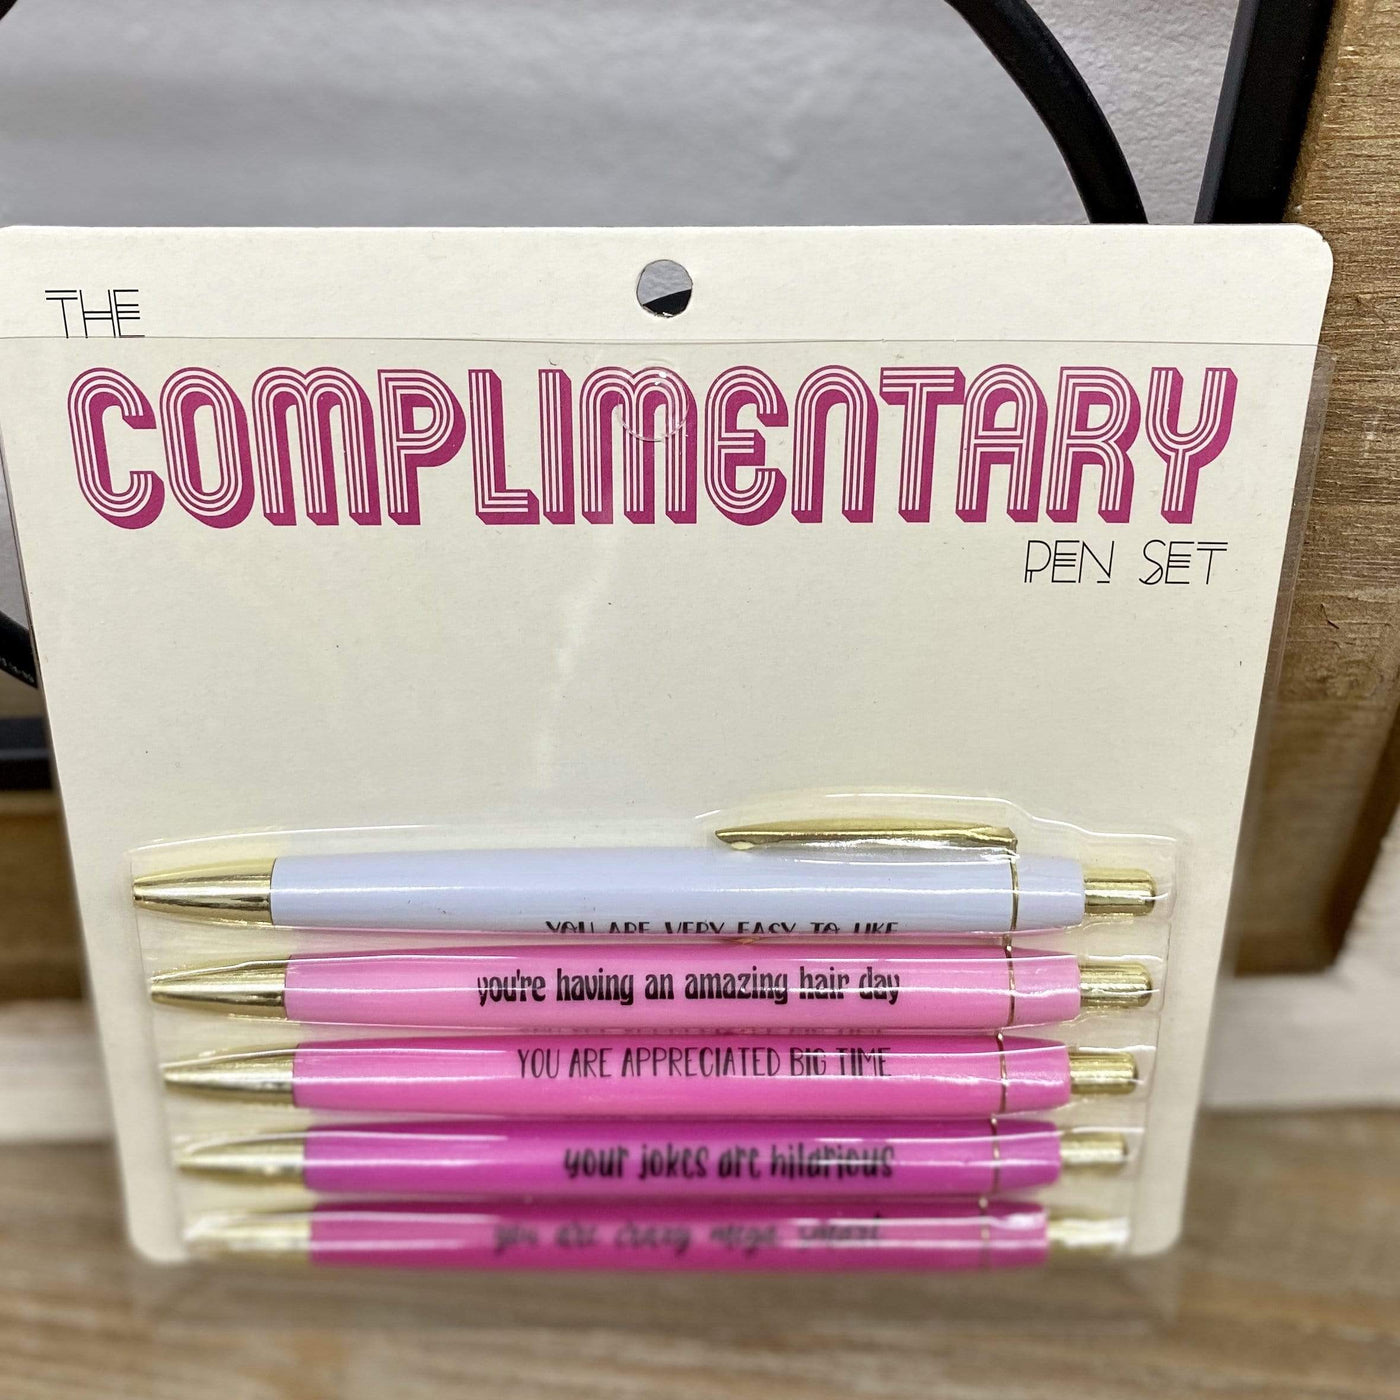 The Complimentary Pen Set